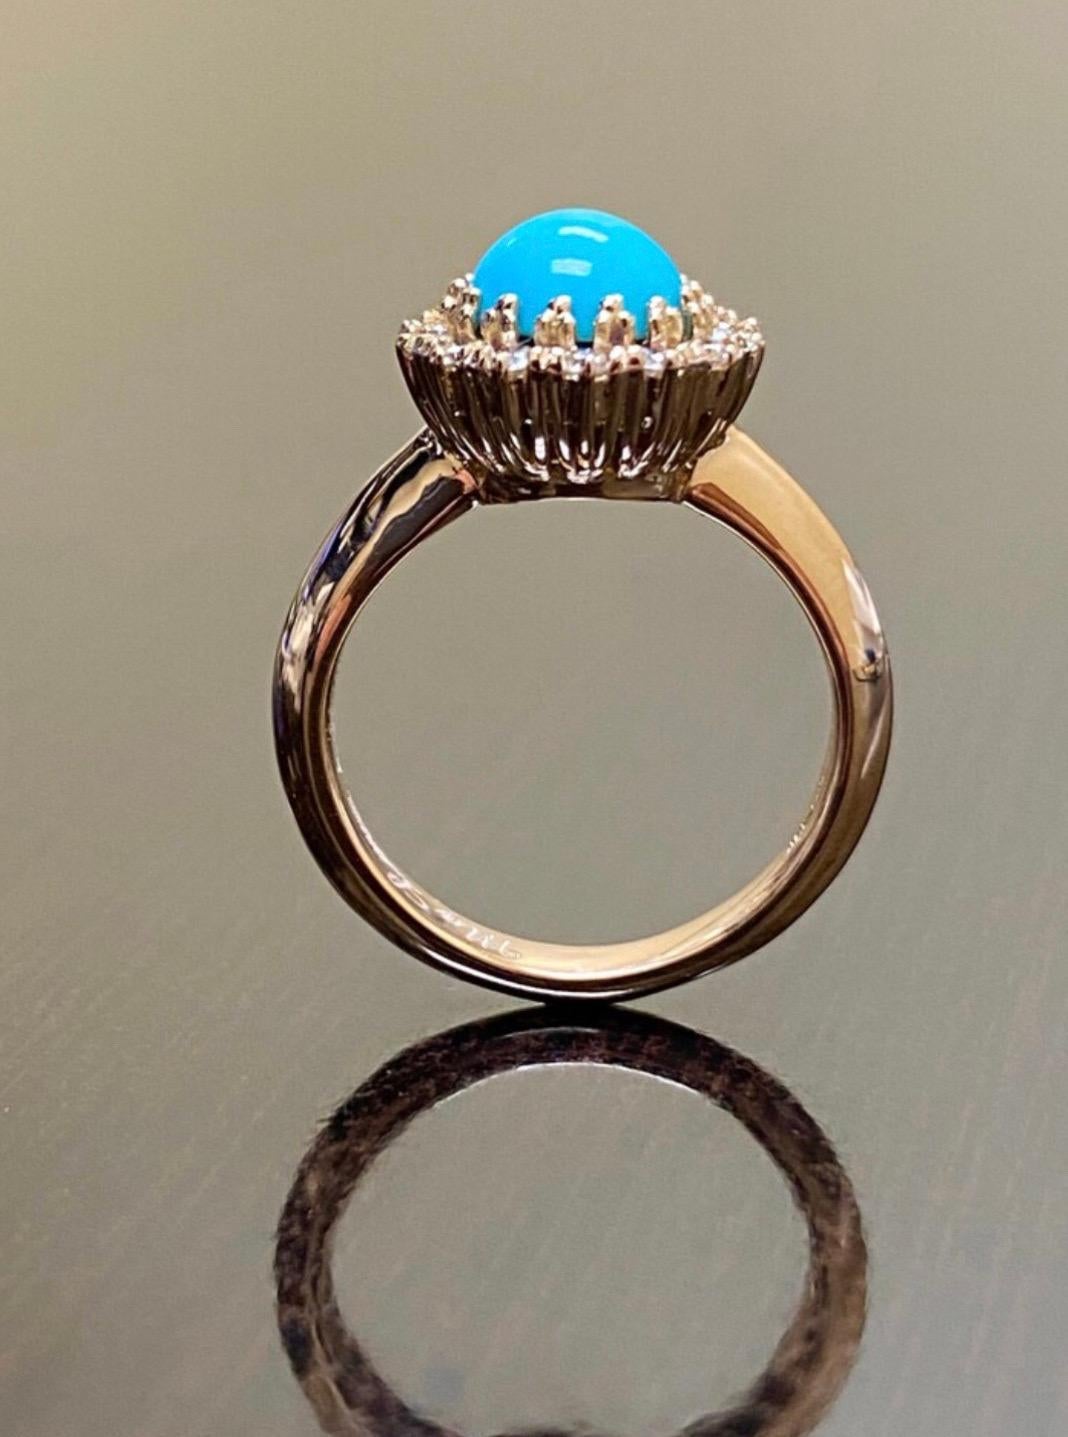 DeKara Designs Collection


Our latest design! An elegant Sleeping Beauty Turquoise Halo Diamond Engagement Ring.

Metal- 18K Rose Gold, .750.

Stones- Center Features an Specially Cut Round Domed Shape 7 MM Turquoise. Diamonds will be F-G Color VS